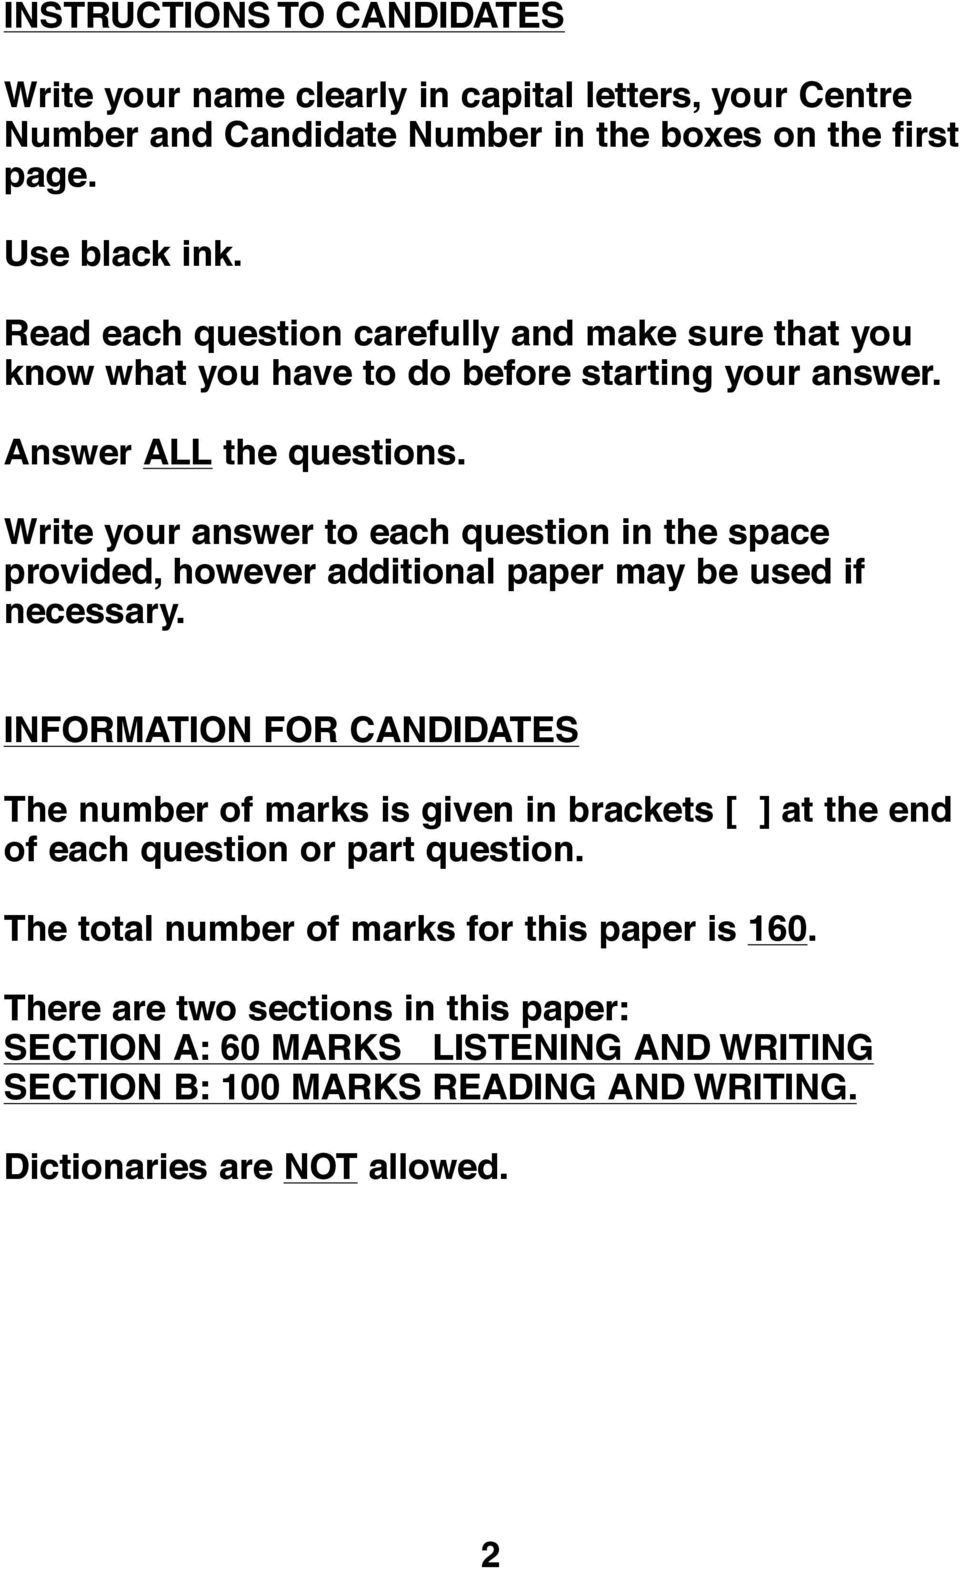 Write your answer to each question in the space provided, however additional paper may be used if necessary.